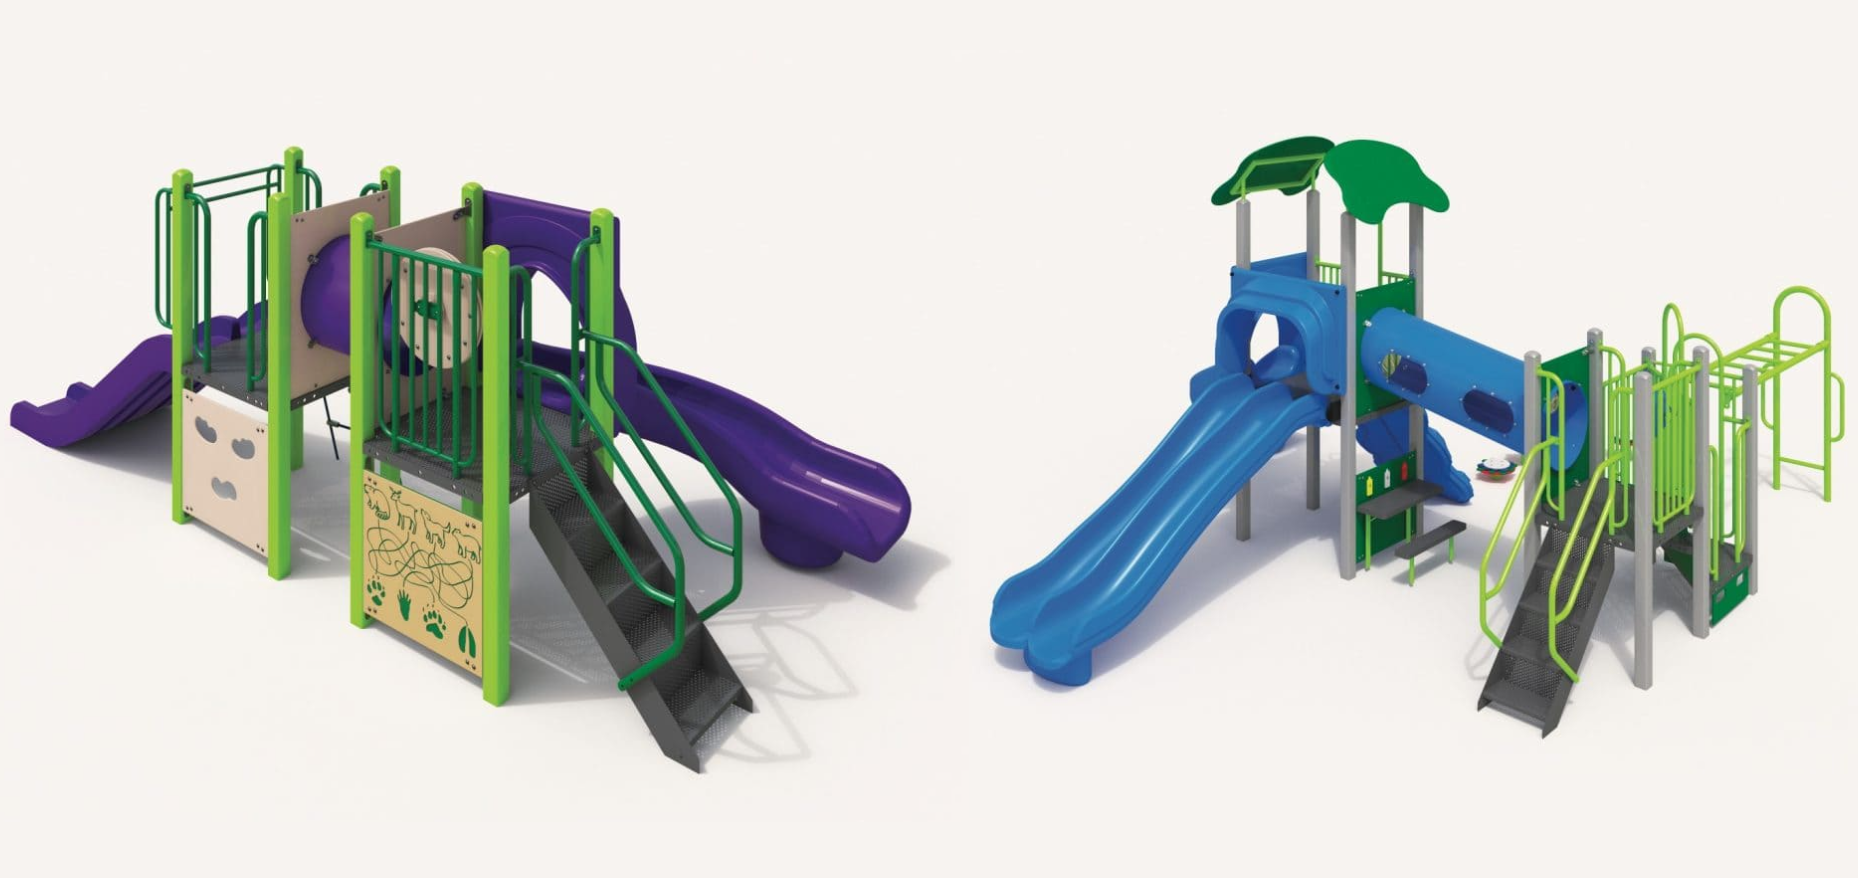 Types of playground: What is the most suitable playground for my children?